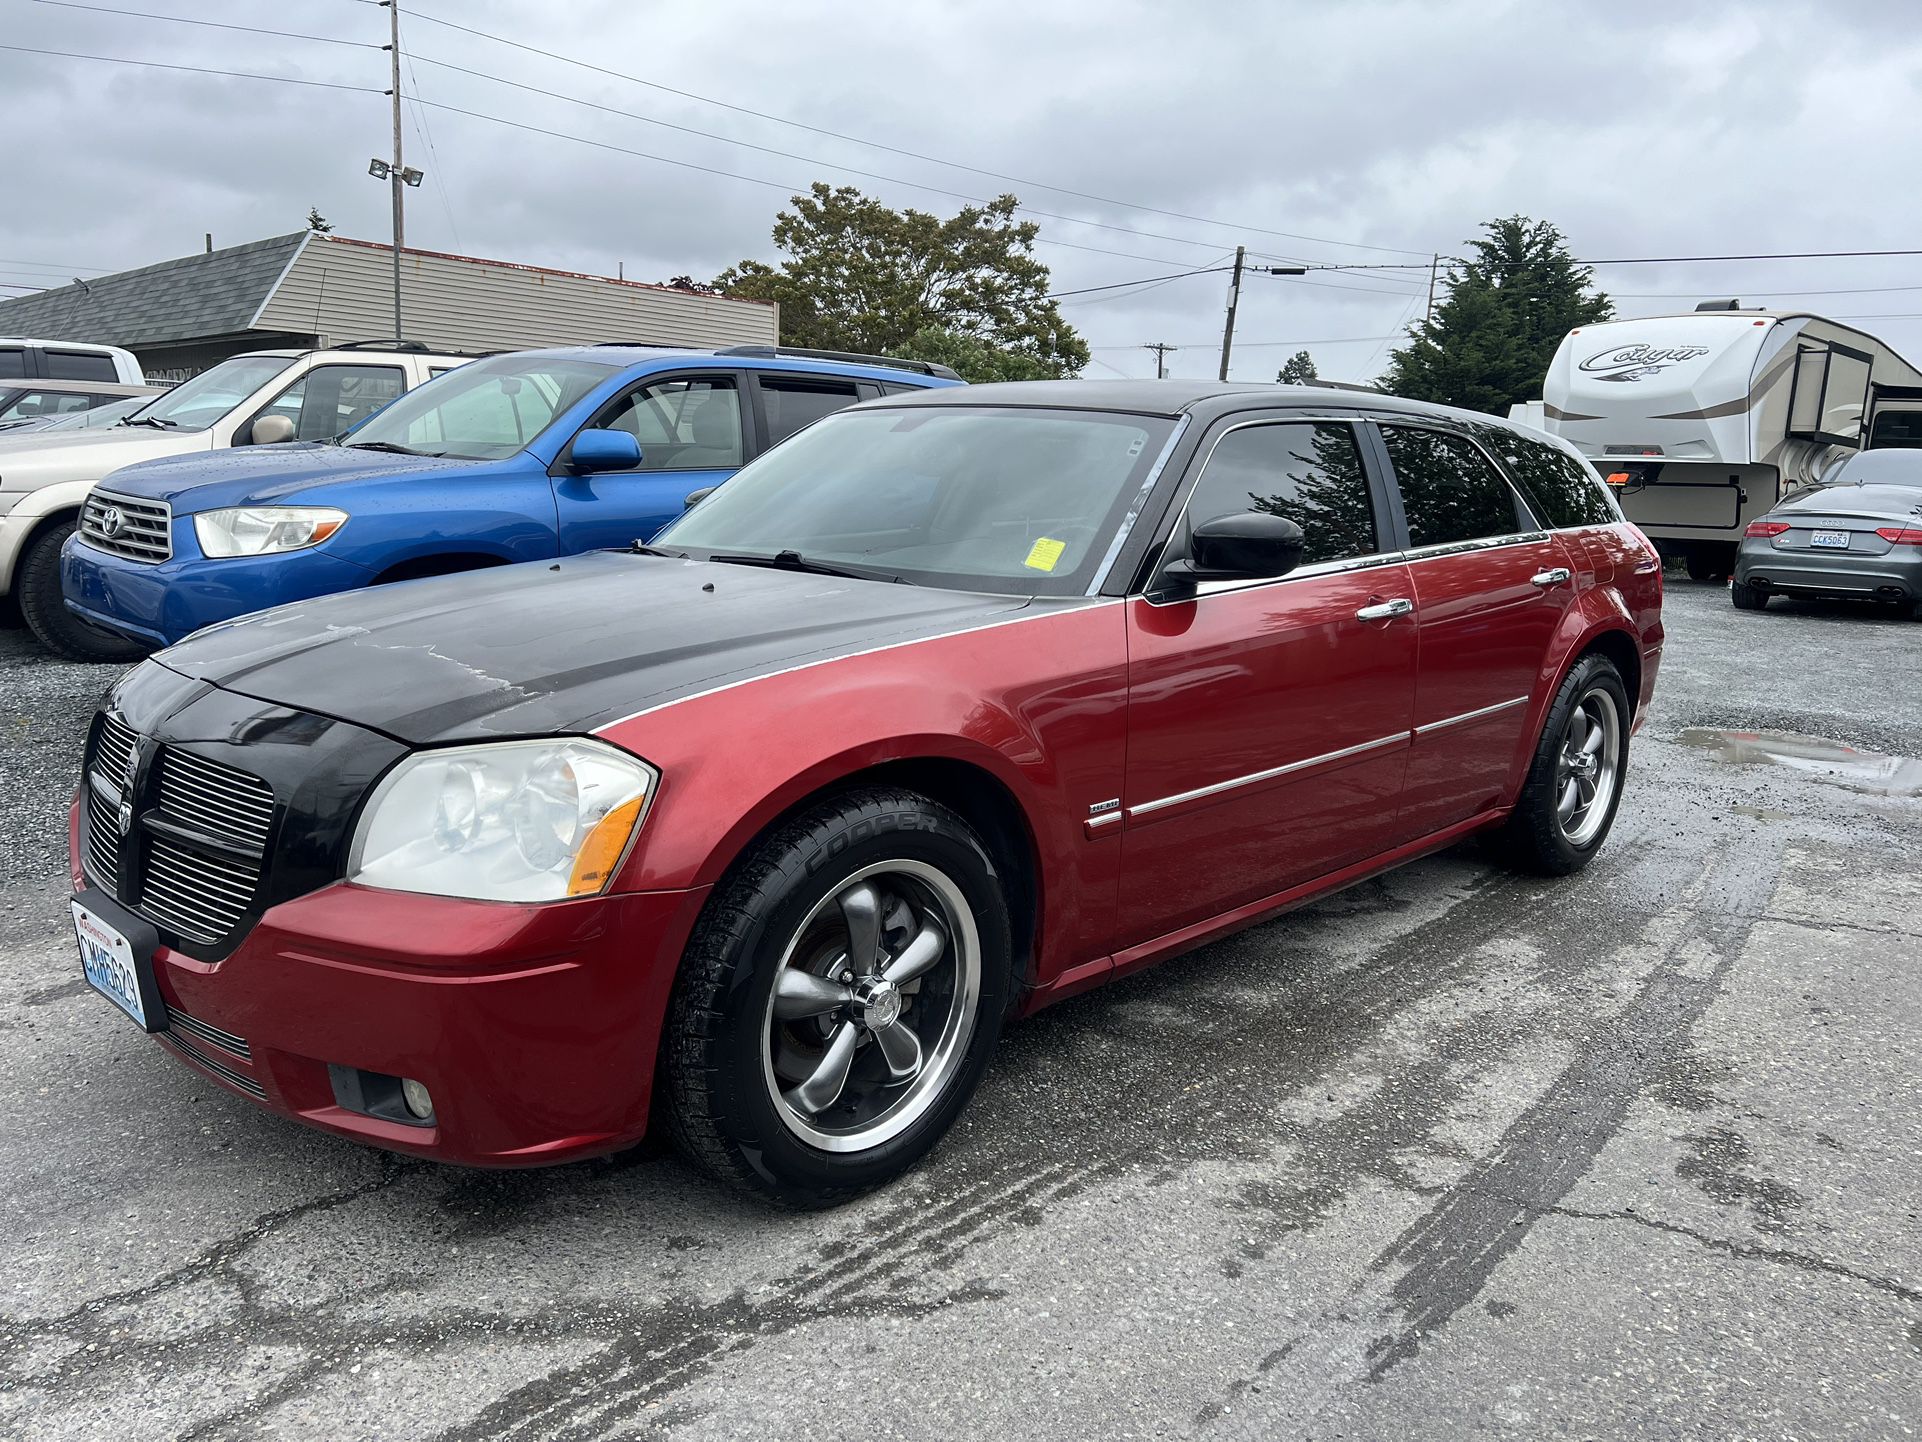 2005 Dodge Magnum R/T Sport Wagon  HEMI v8 102k miles Clean title  Leather, sunroof  Hard to find R/T  2 tone paint job, the black on hood and top the